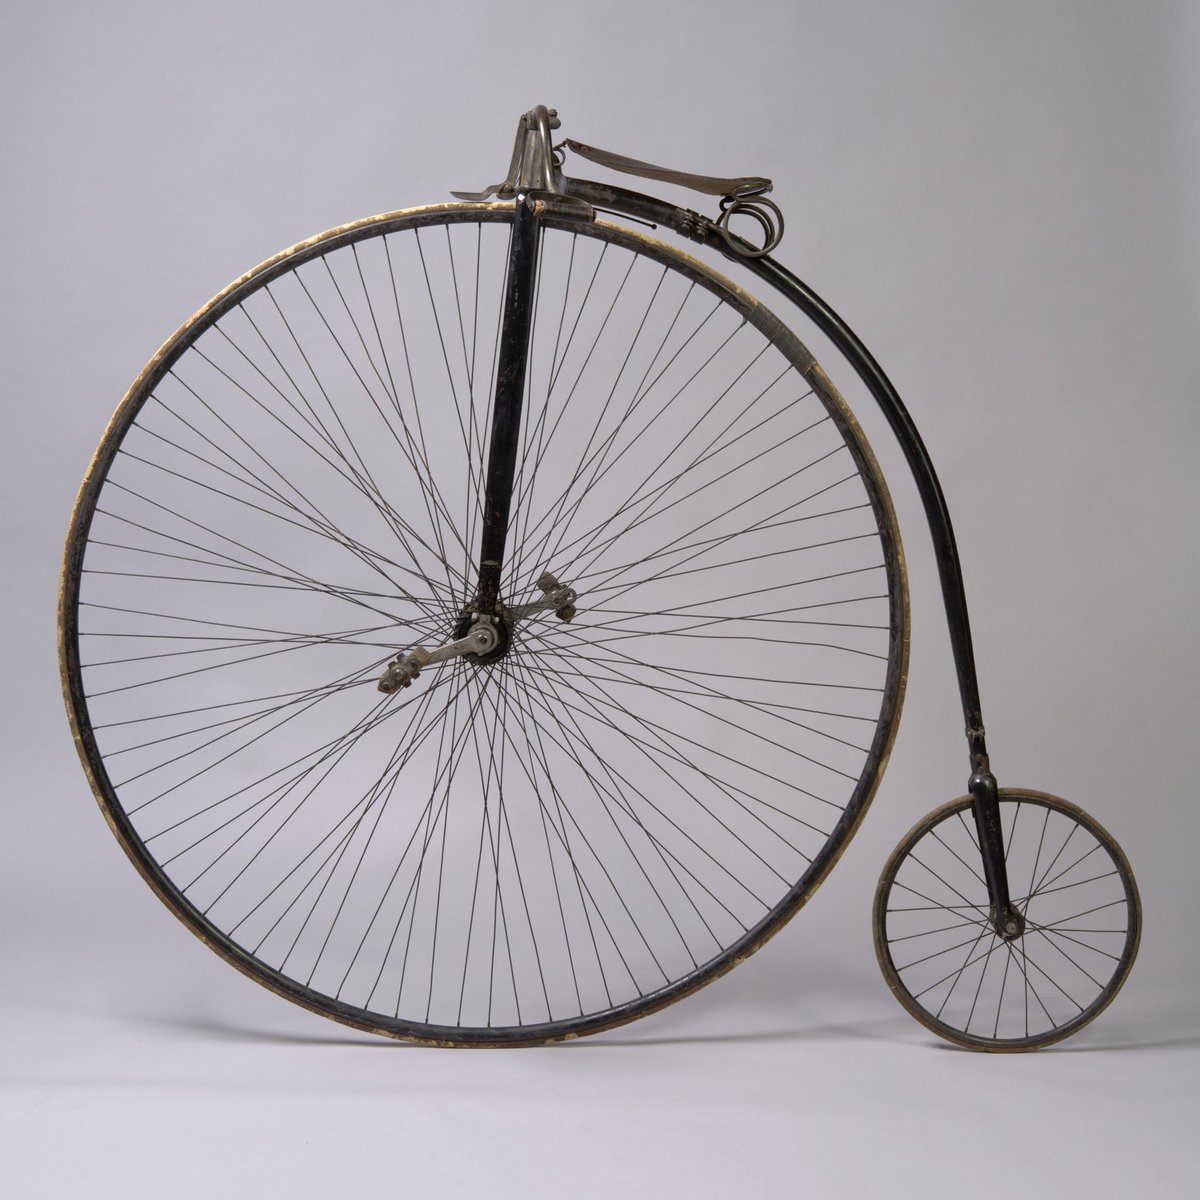 During tonight’s chapters we have had to google old-fashioned bicycles (velocipedes).